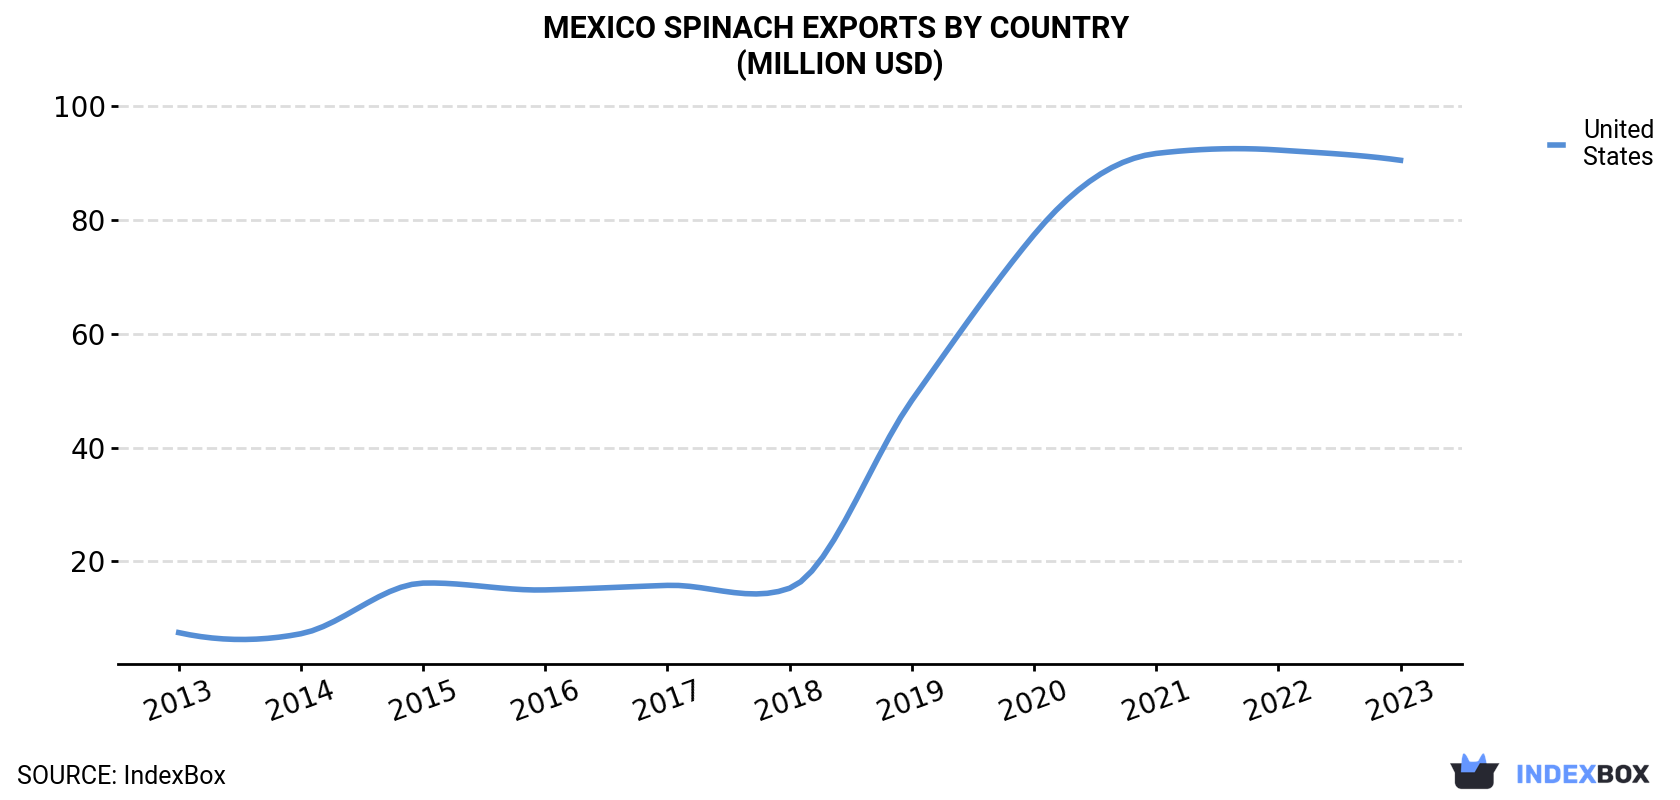 Mexico Spinach Exports By Country (Million USD)